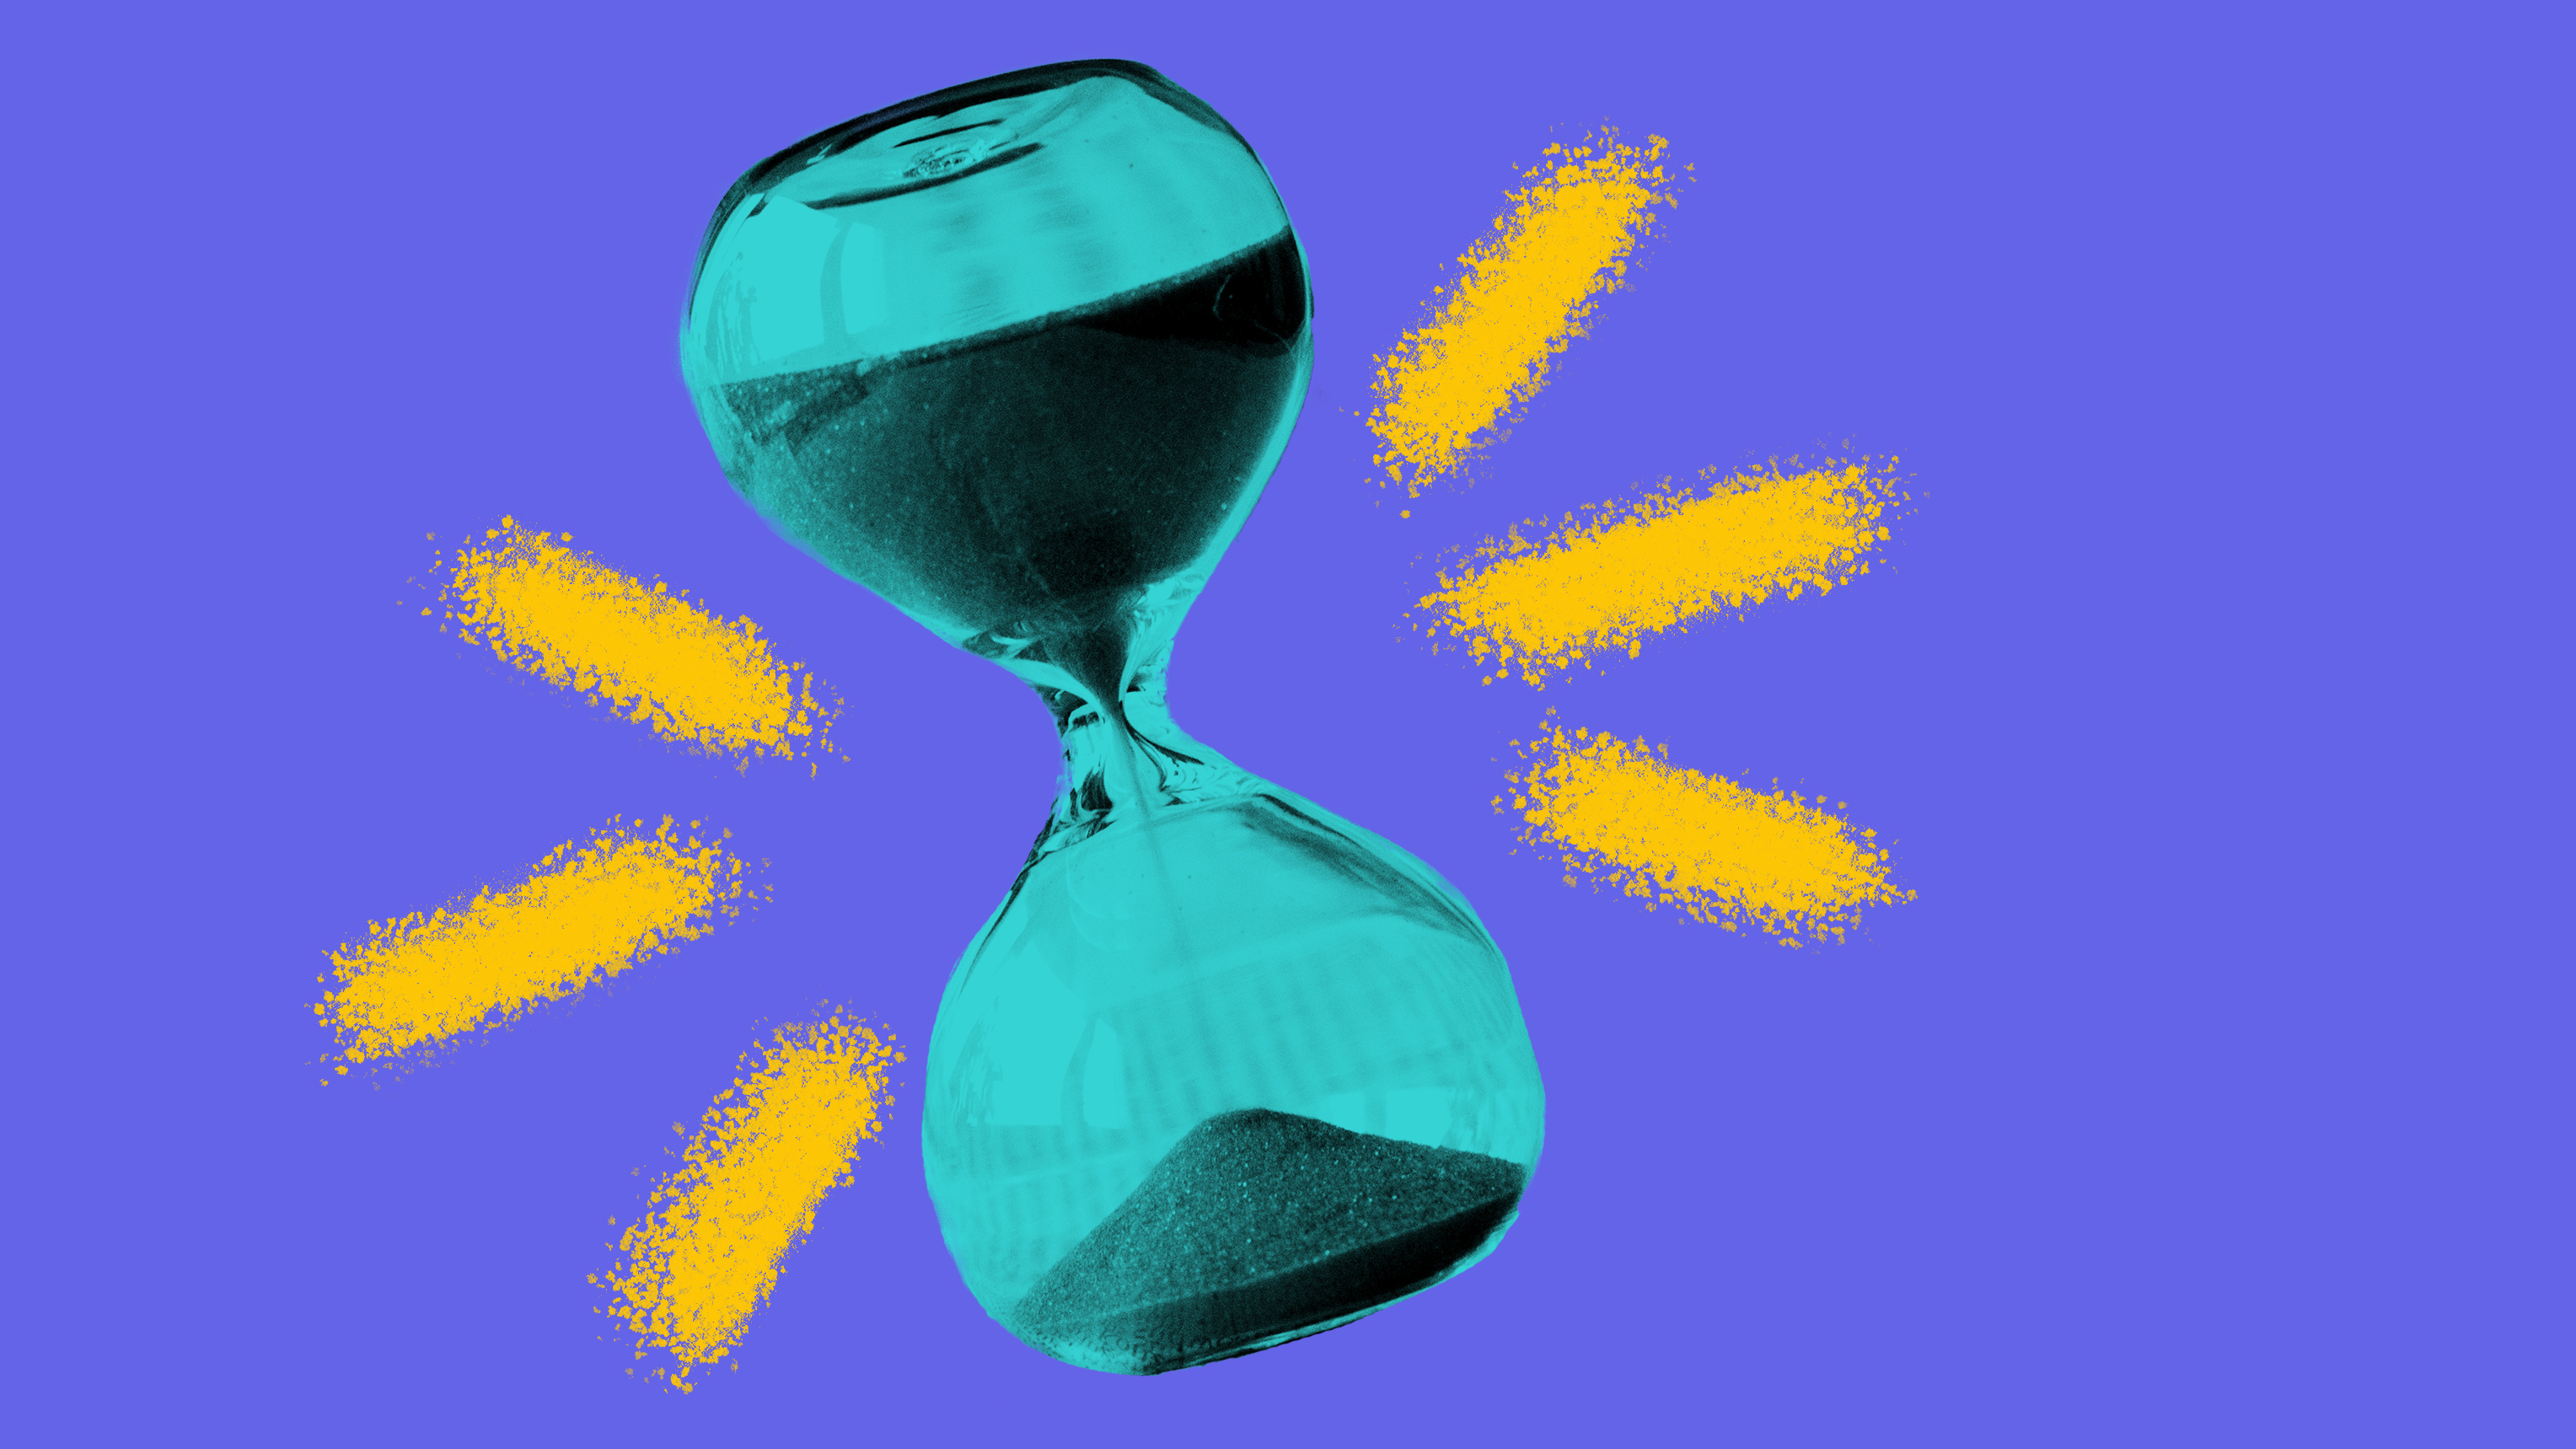 Illustration of blue hourglass on a purple background, with yellow brush strokes coming out from the hourglass.